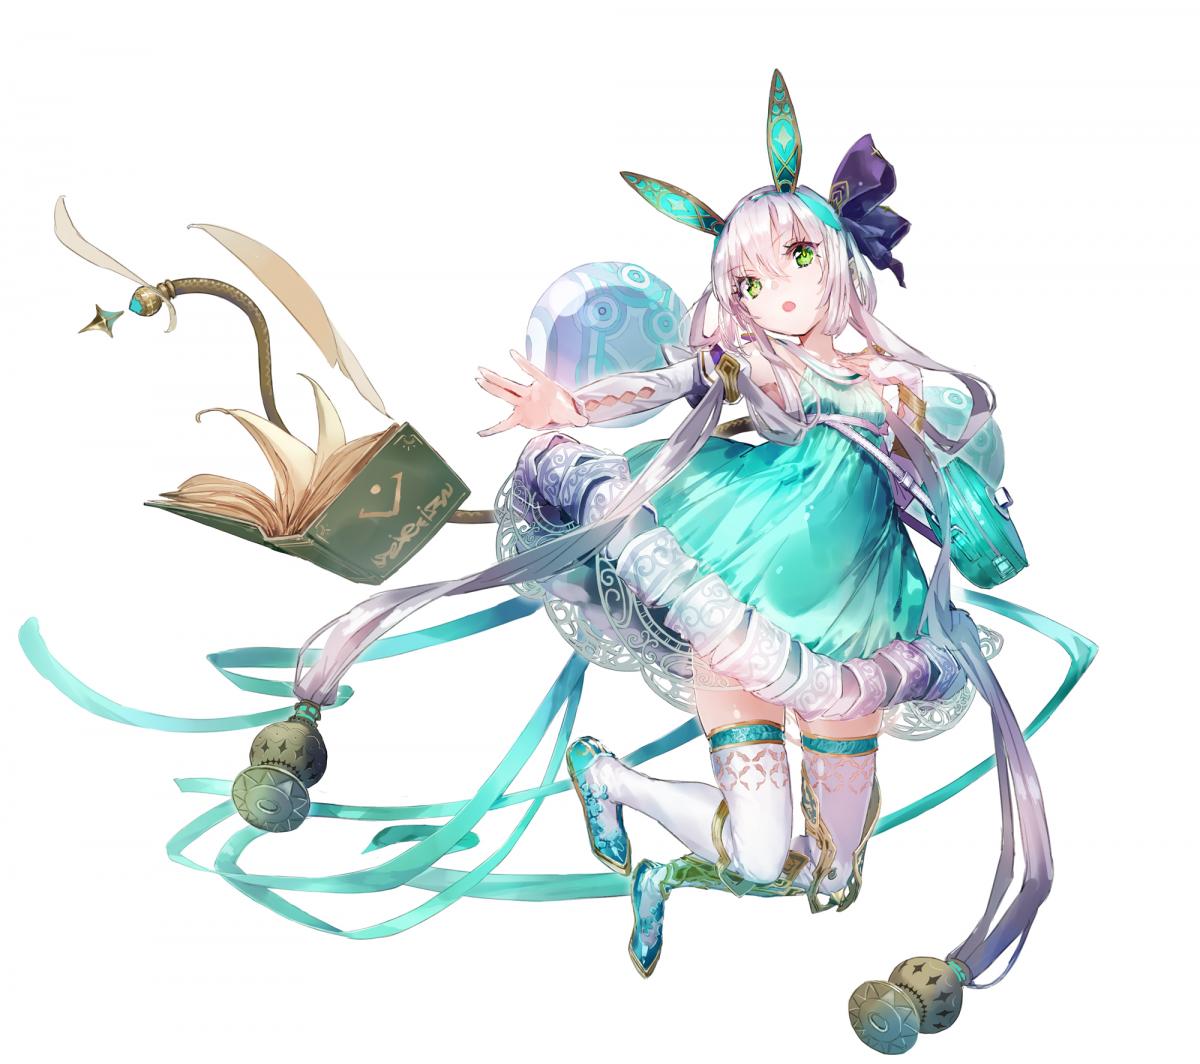 Image Atelier Sophie 2 : The Alchemist of the Mysterious Dream 34